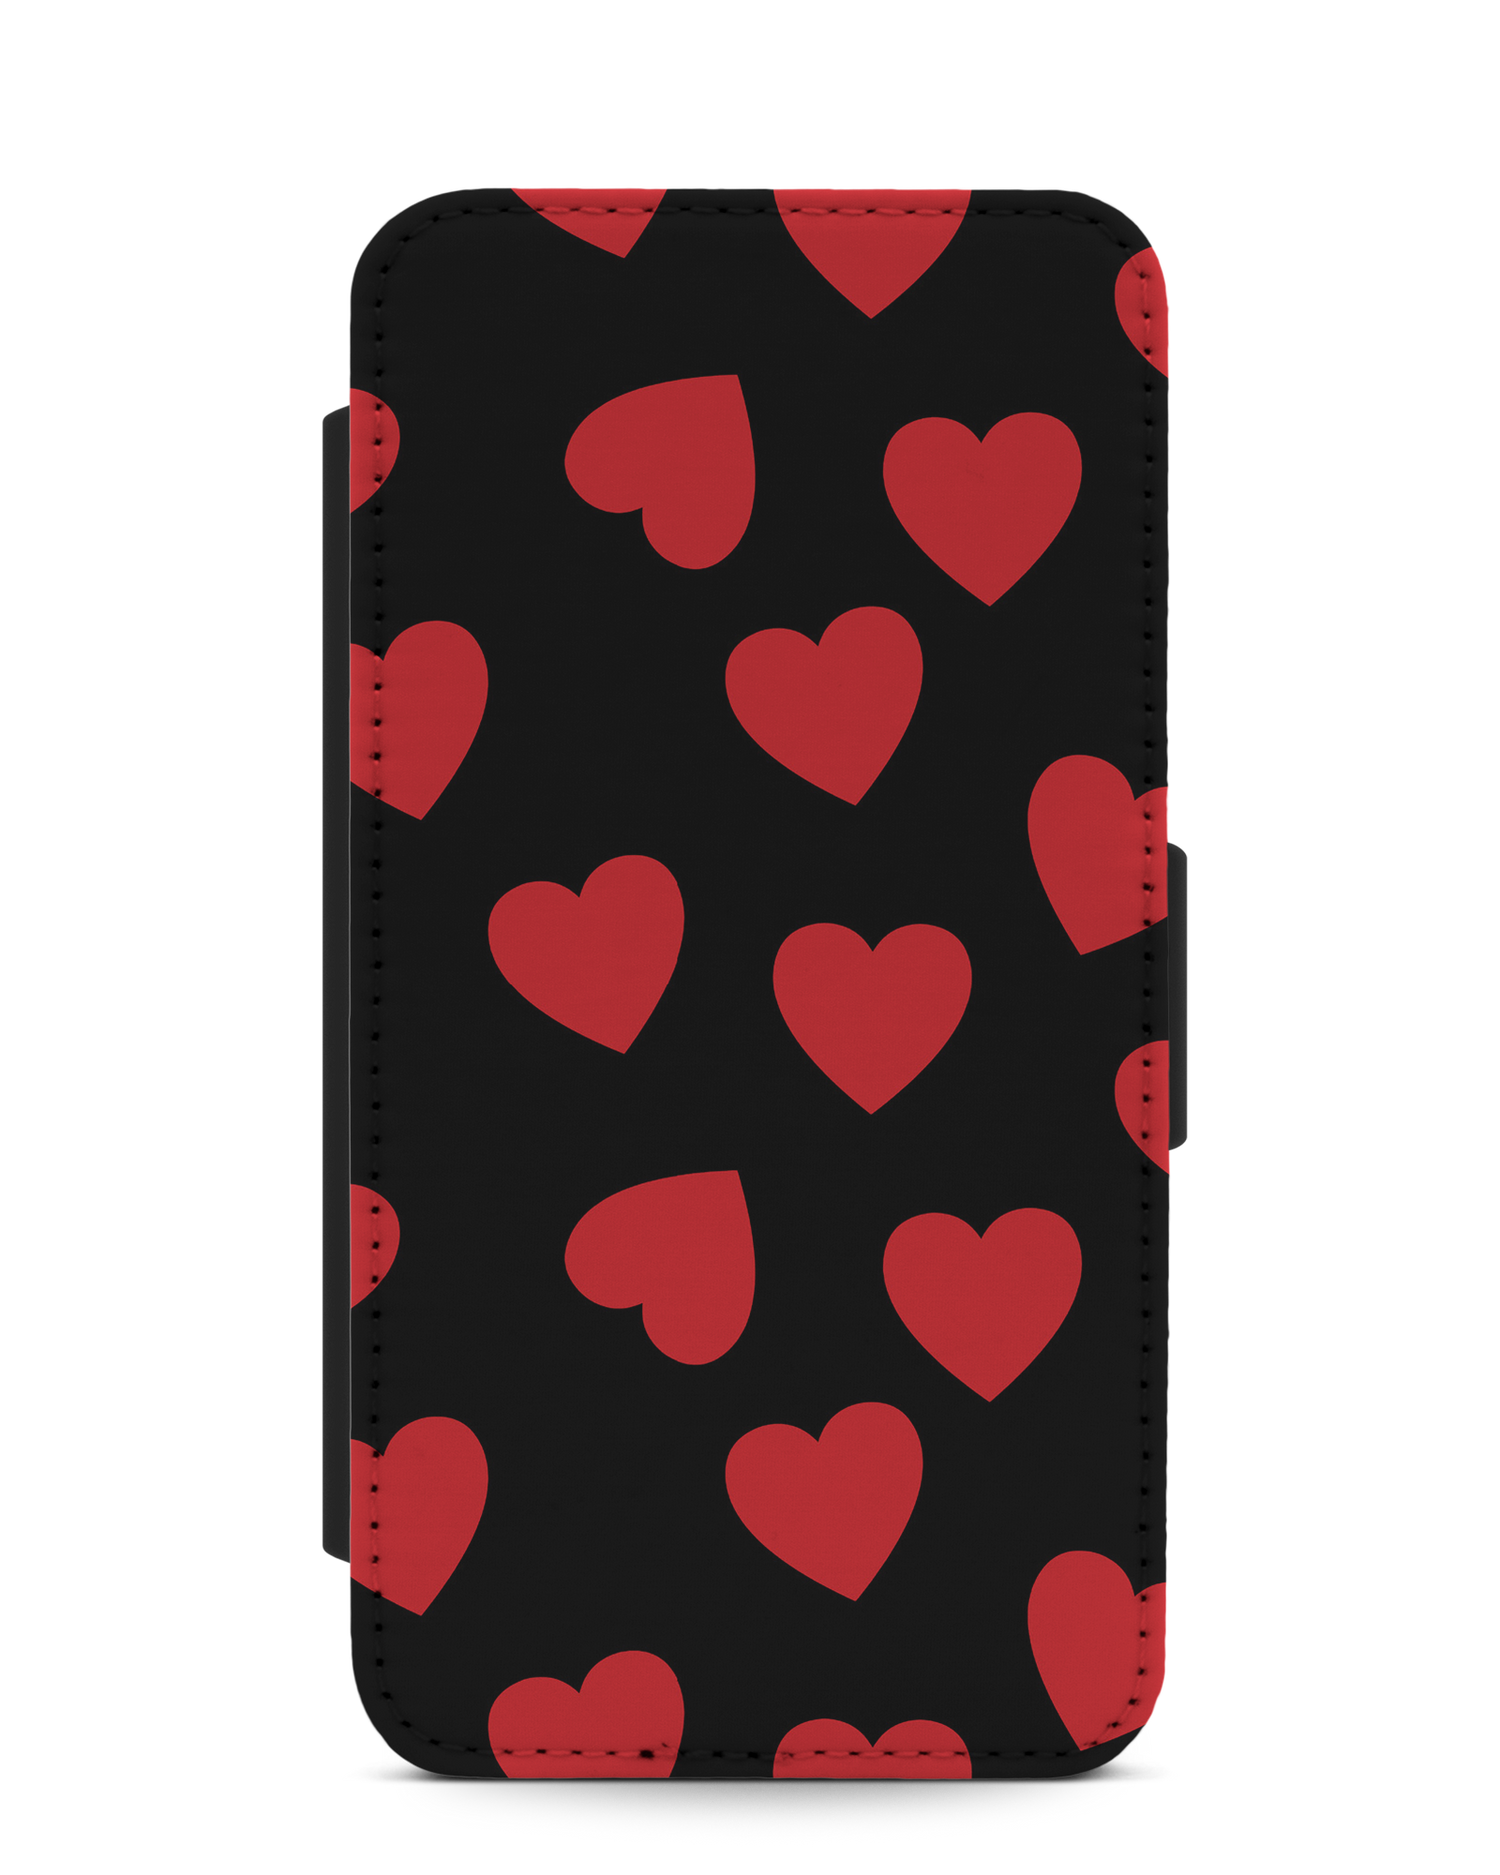 Repeating Hearts Wallet Phone Case Samsung Galaxy S10e: Front View